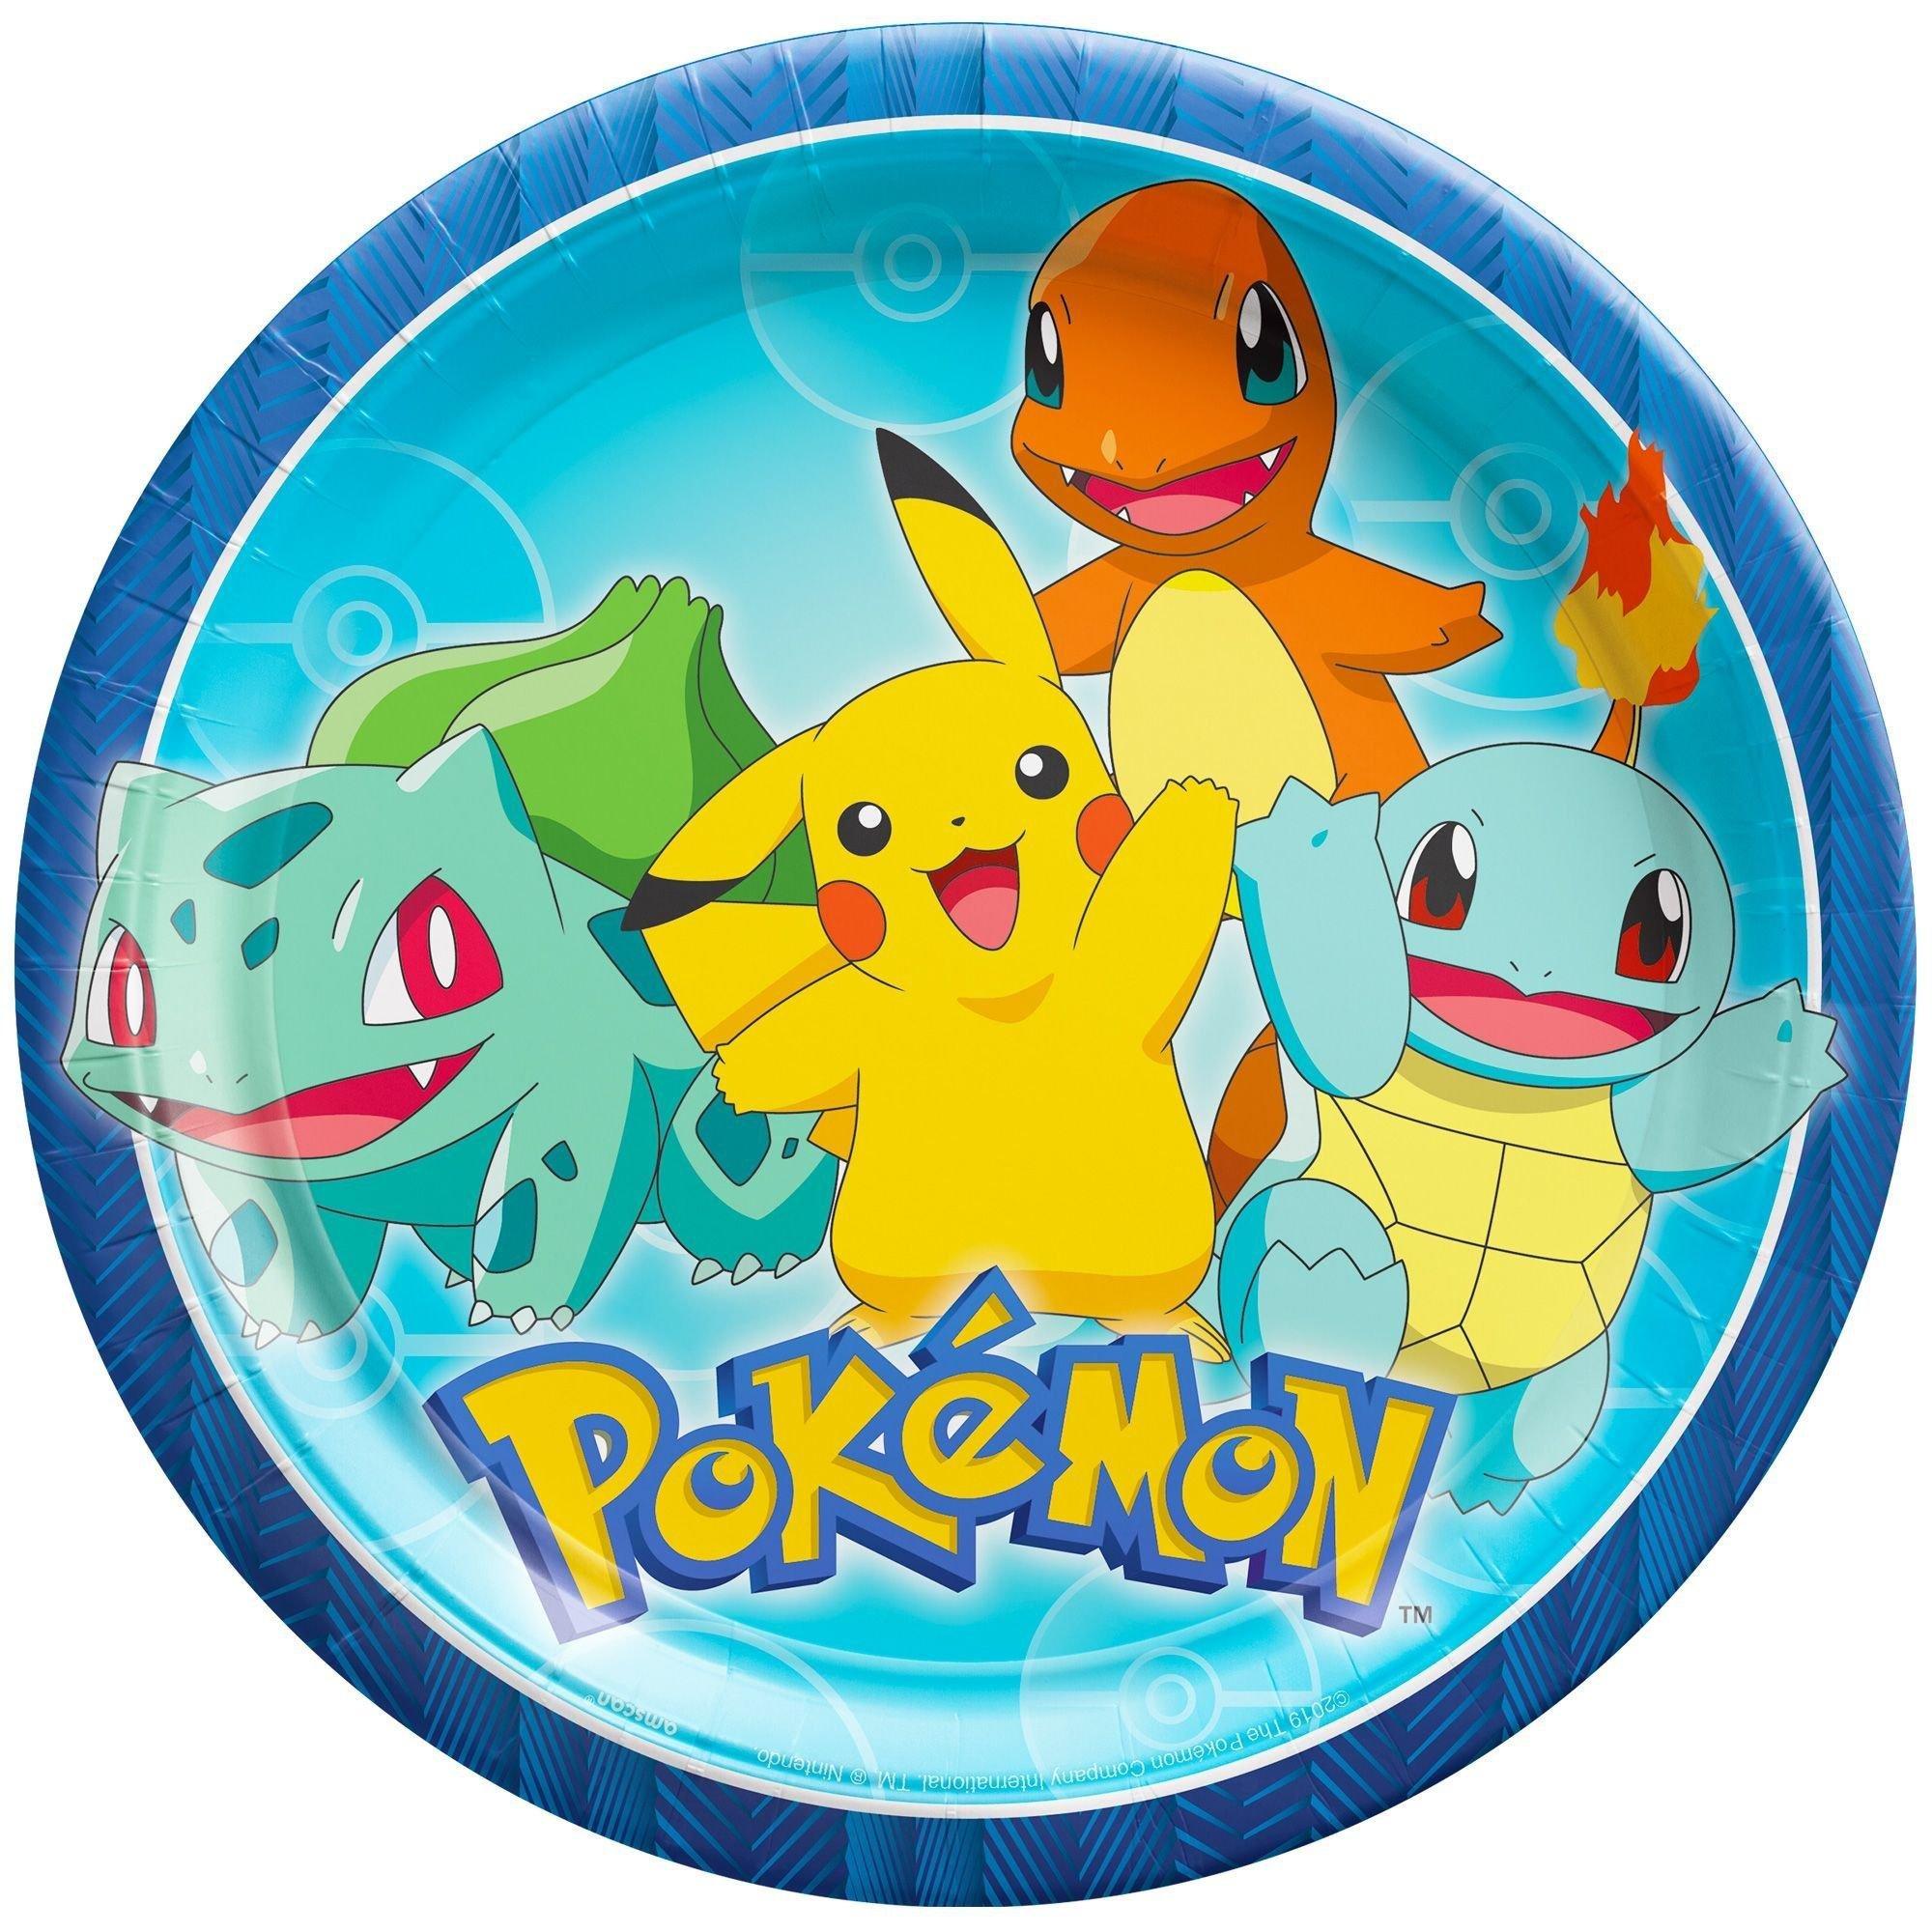 Pokémon Core Party Supplies Pack for 8 Guests - Kit Includes Plates, Napkins & Table Cover